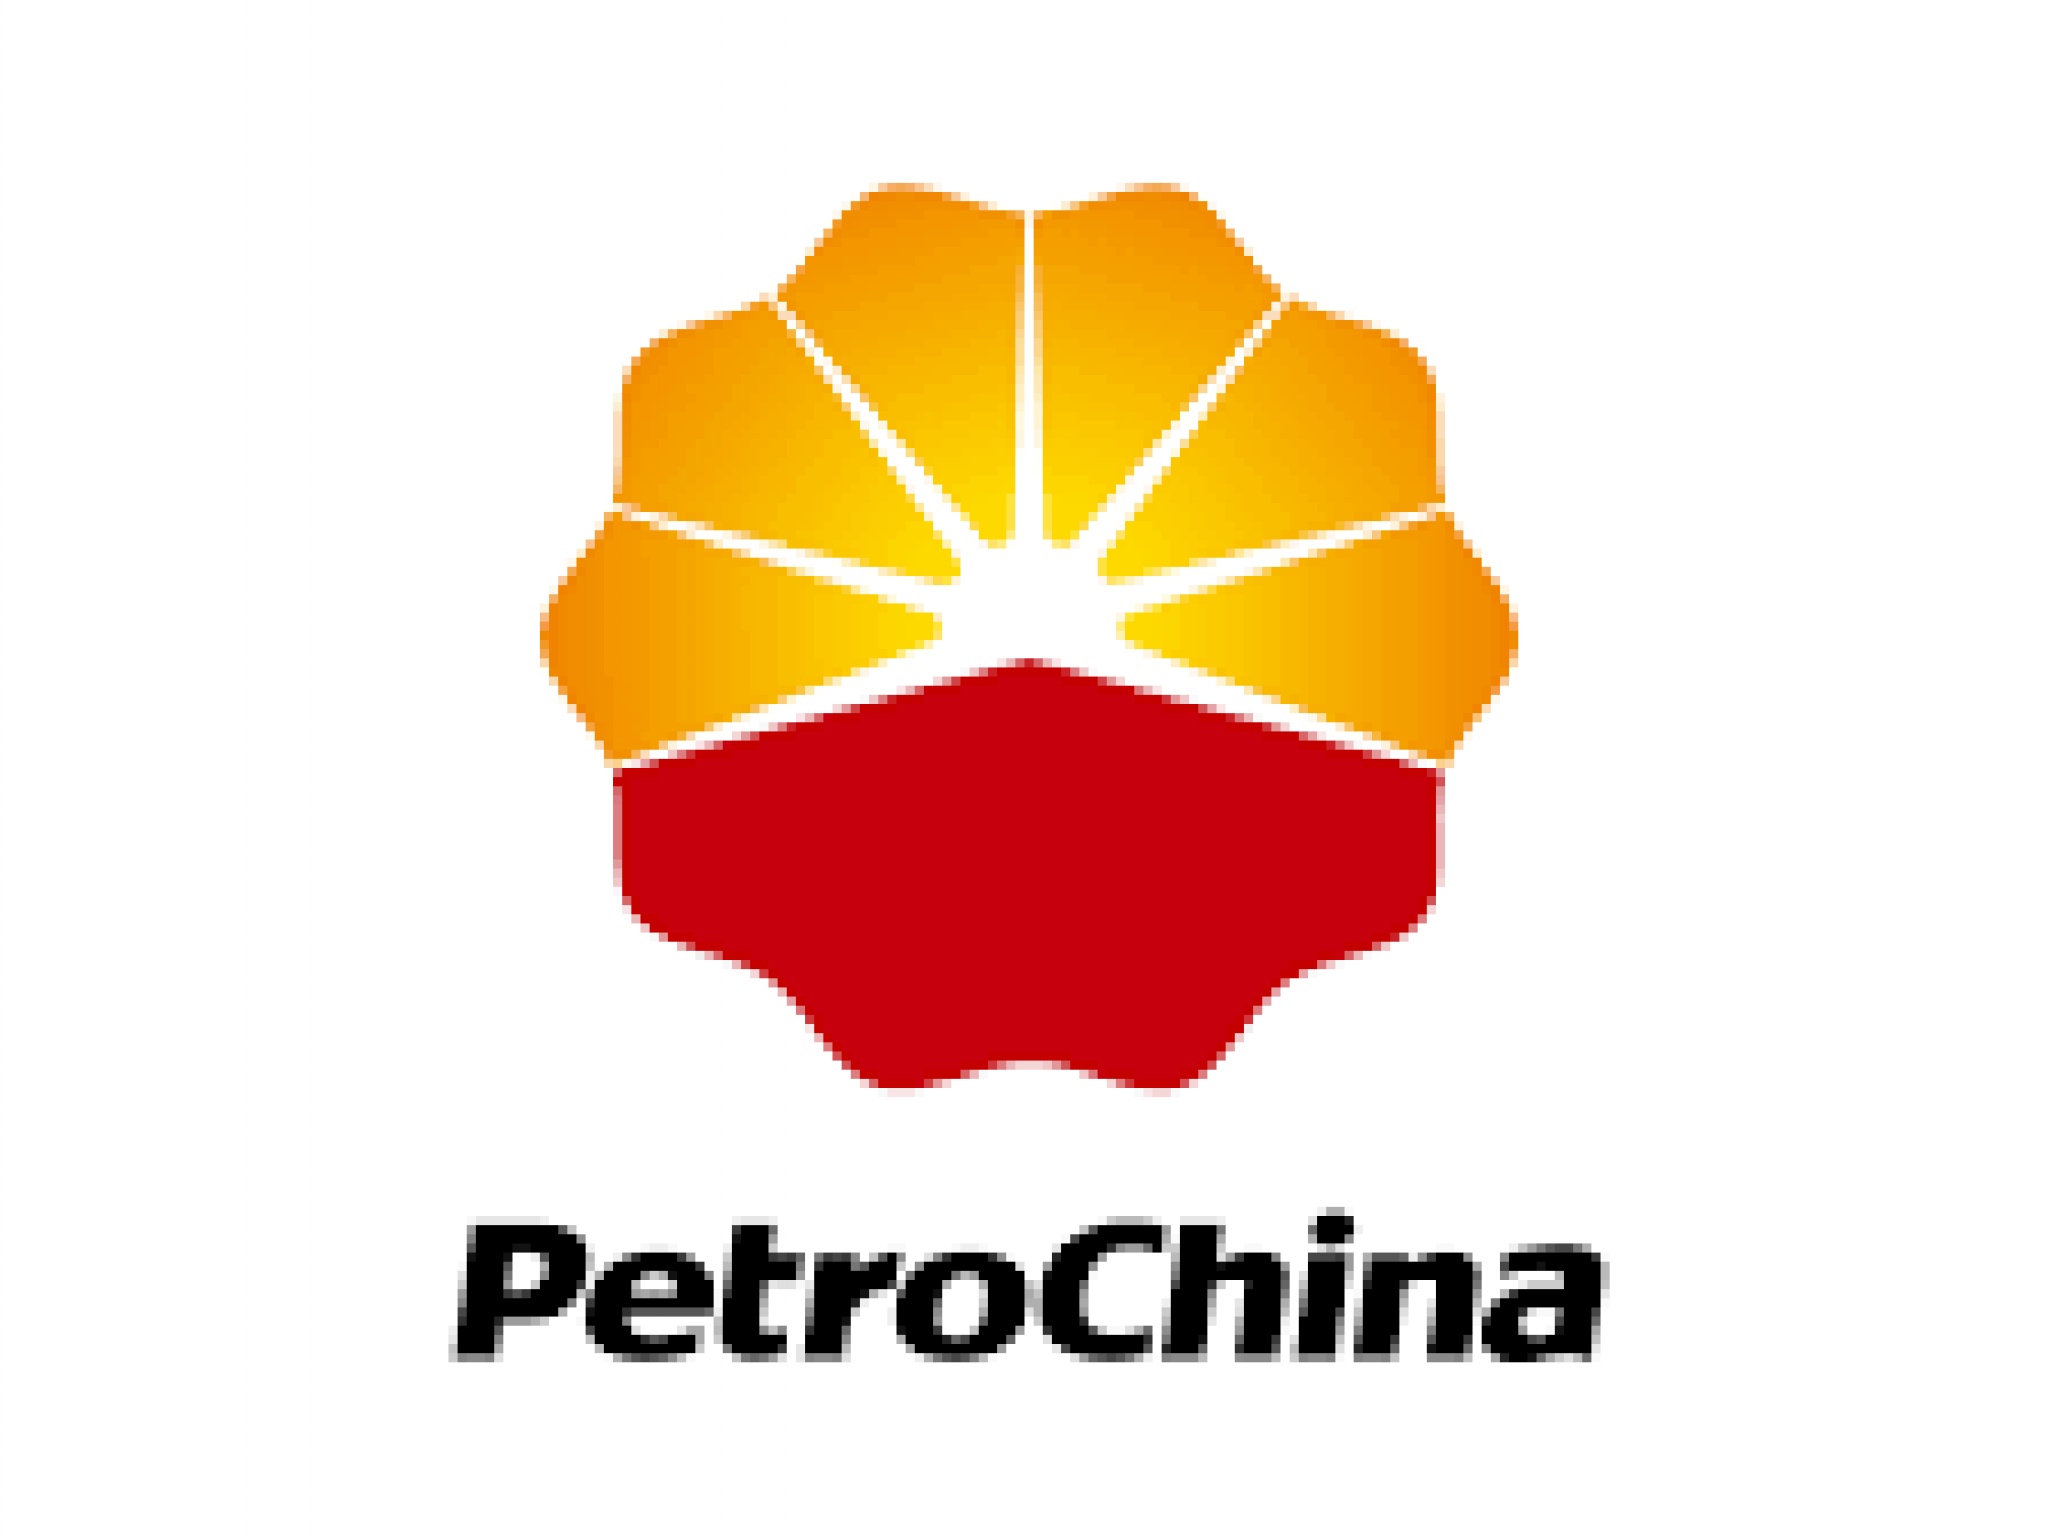  petrochina-mulls-separate-listing-for-its-energy-marketing-business-report 